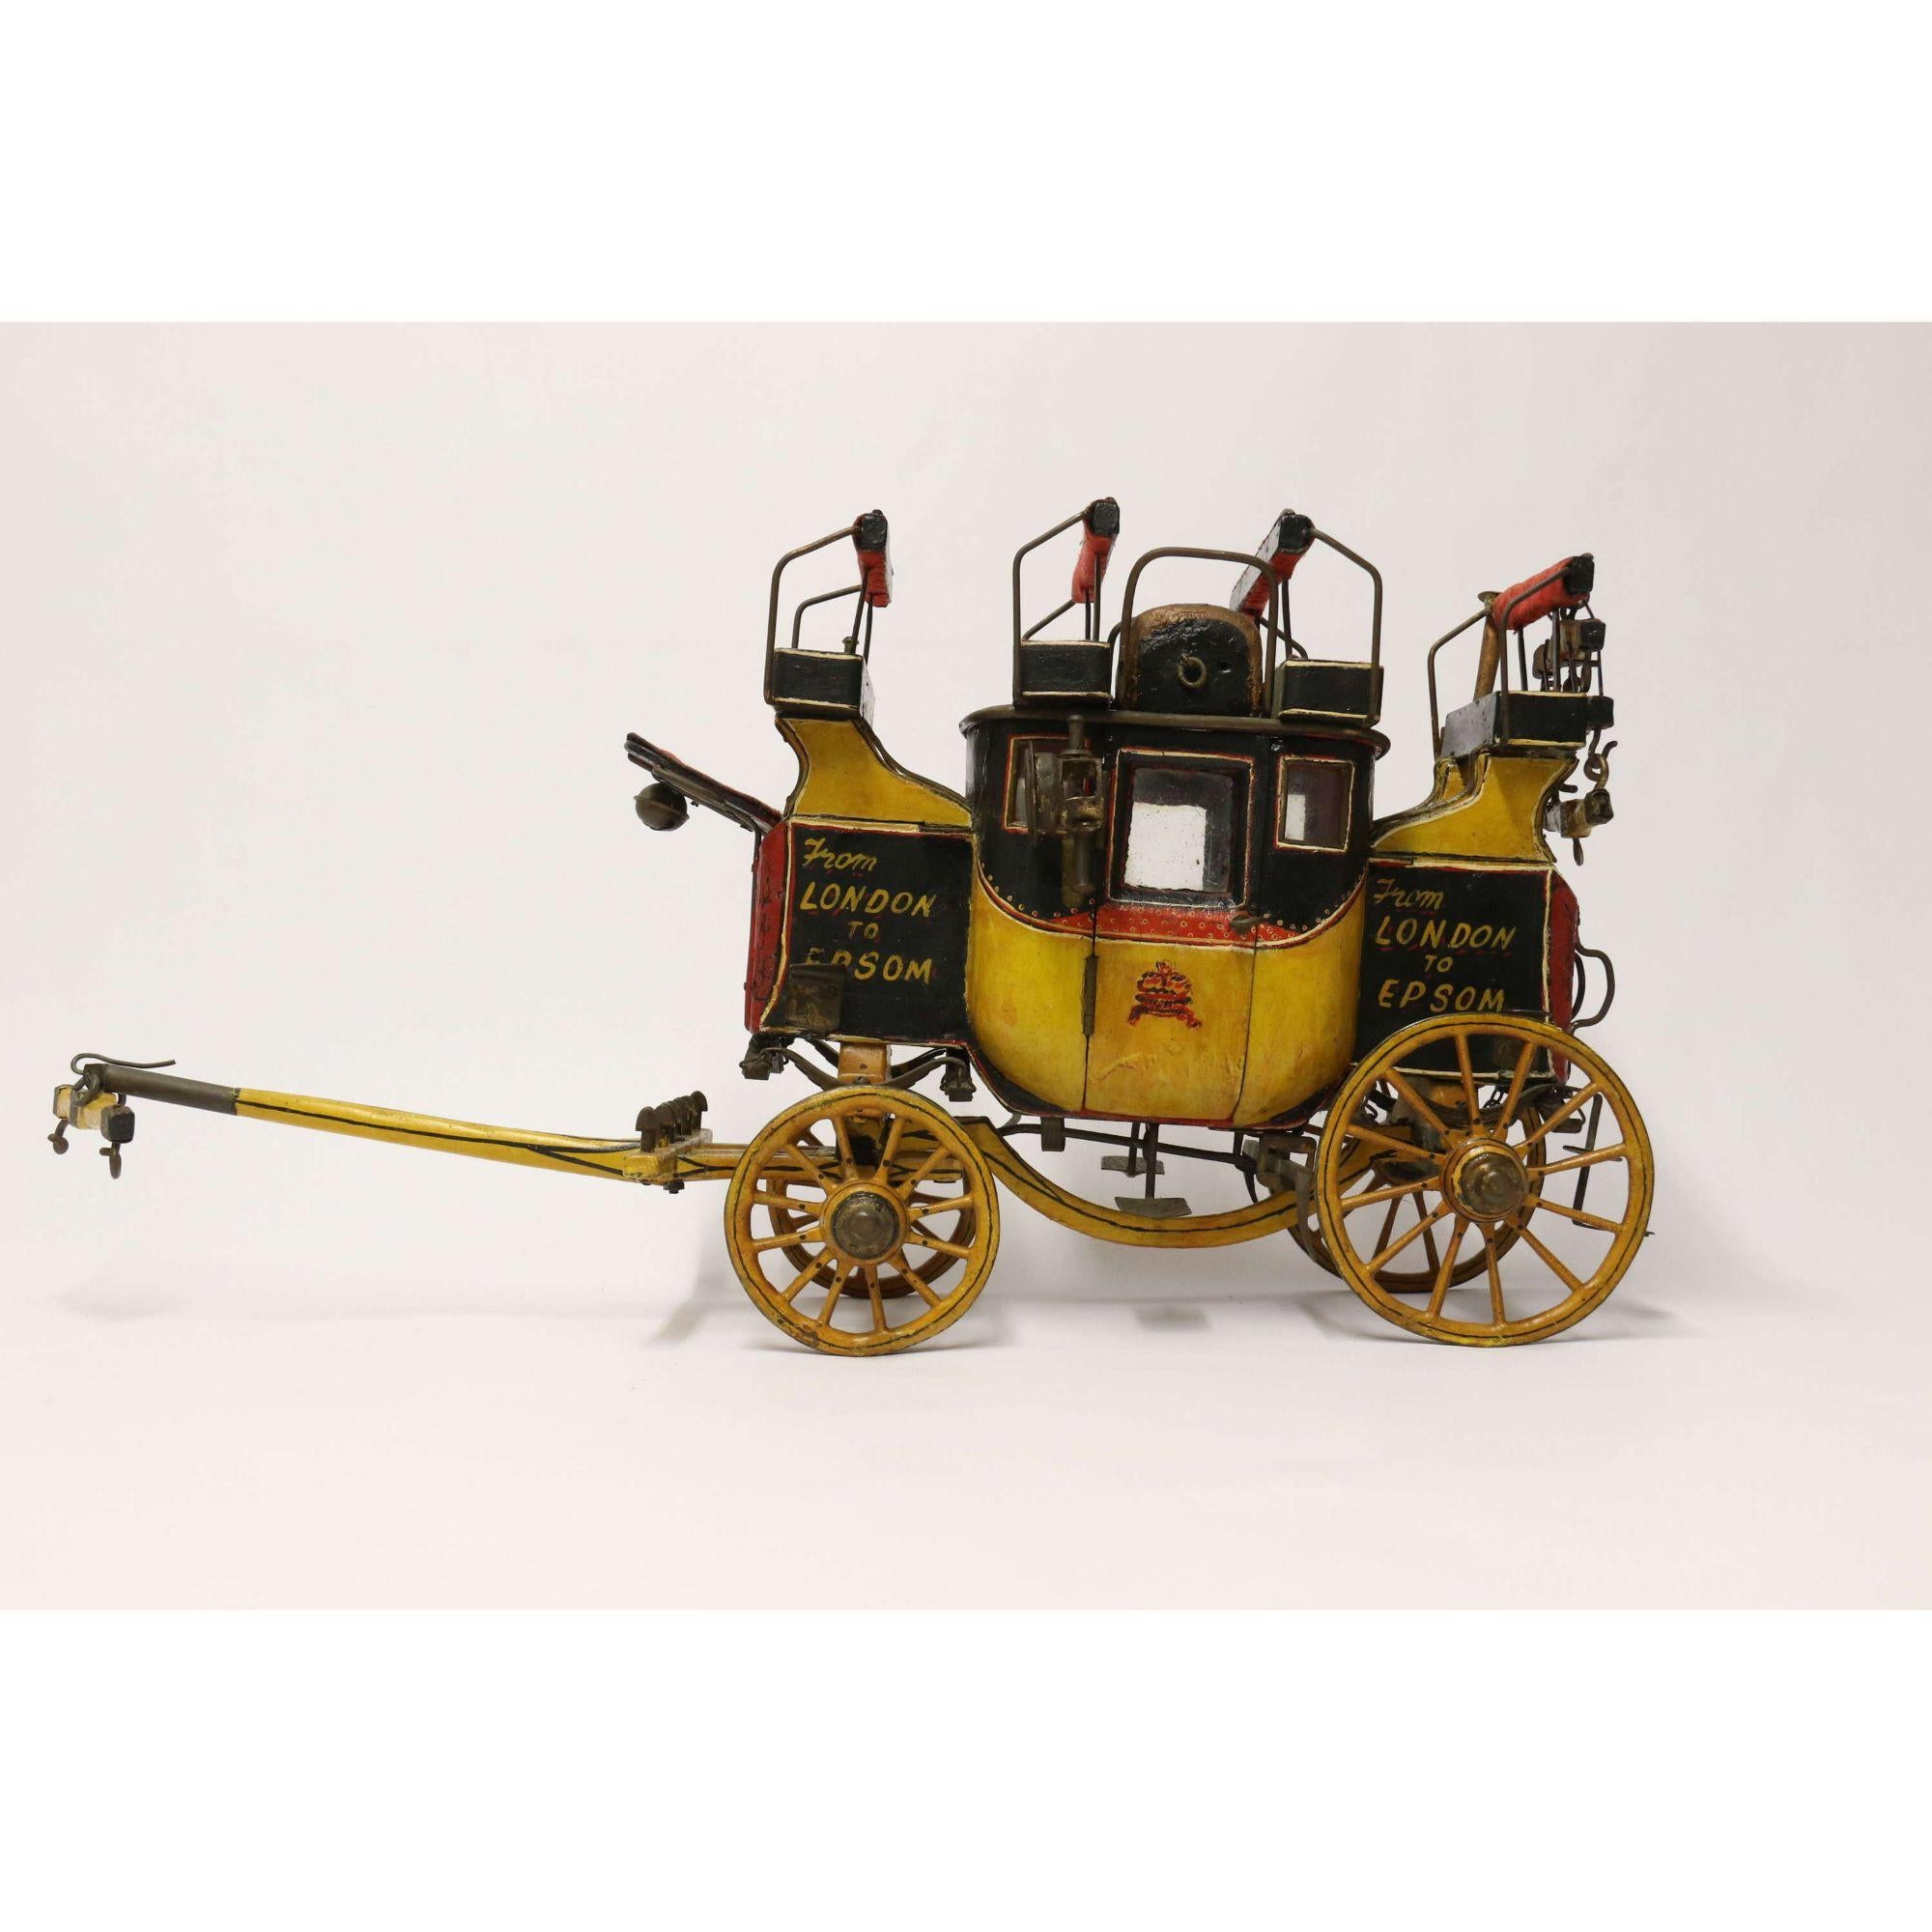 Hand-Painted  English Model of an 18th Century London to Epsom Stagecoach, Edwardian Period